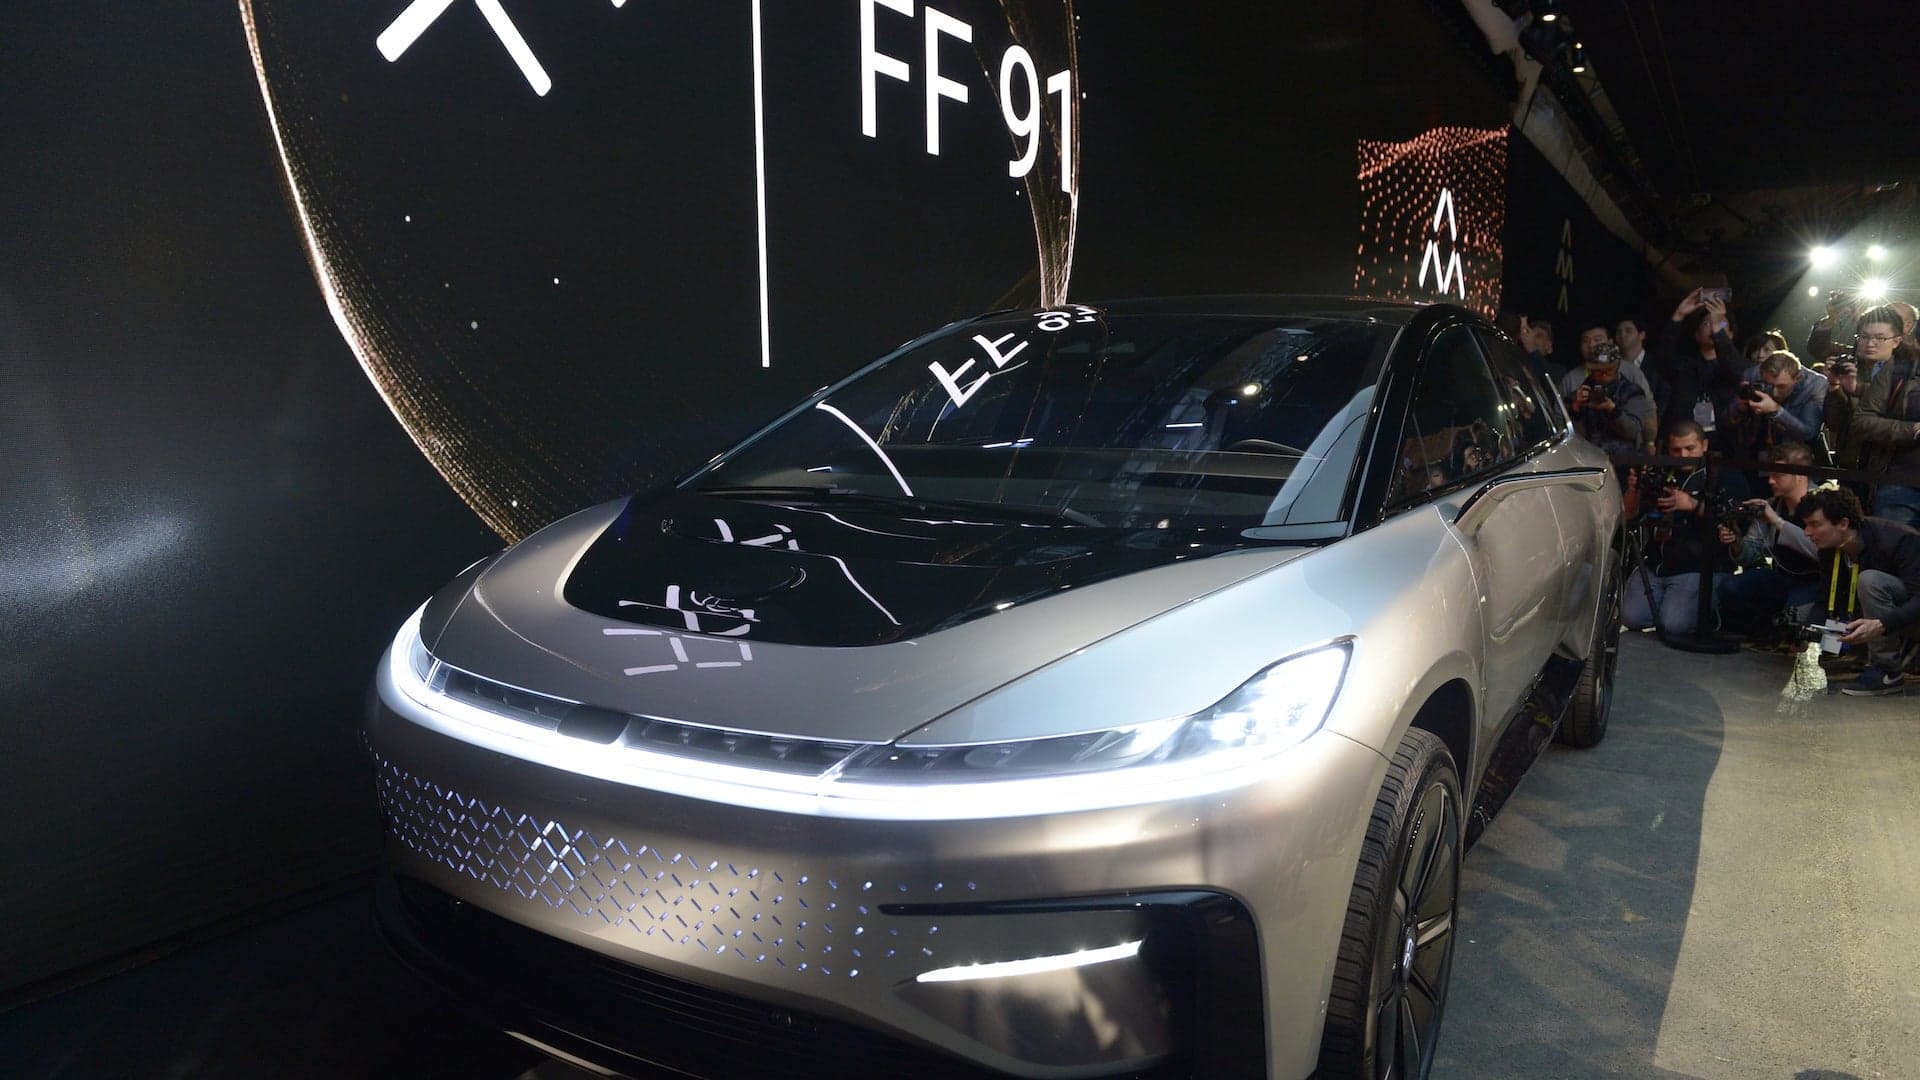 Faraday Future Co-Founder Quits, Calls EV Startup ‘Insolvent’